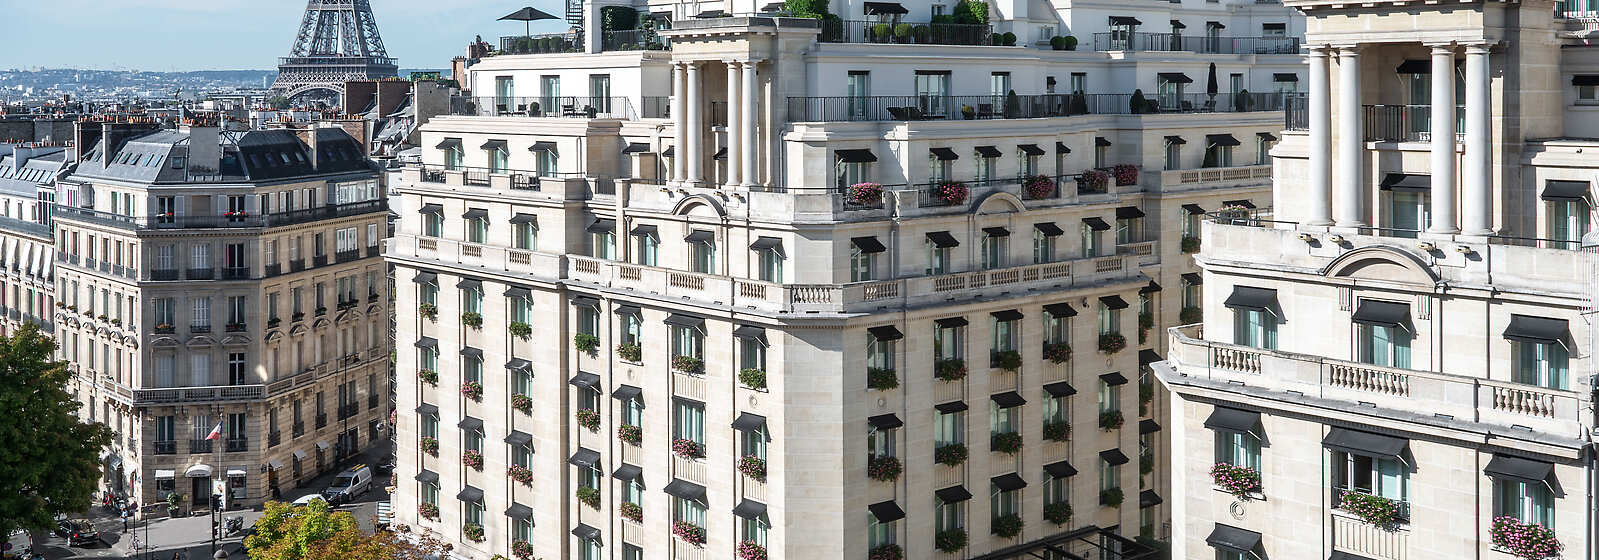 Four Seasons Hotel George V- Paris, France Hotels- Deluxe Hotels